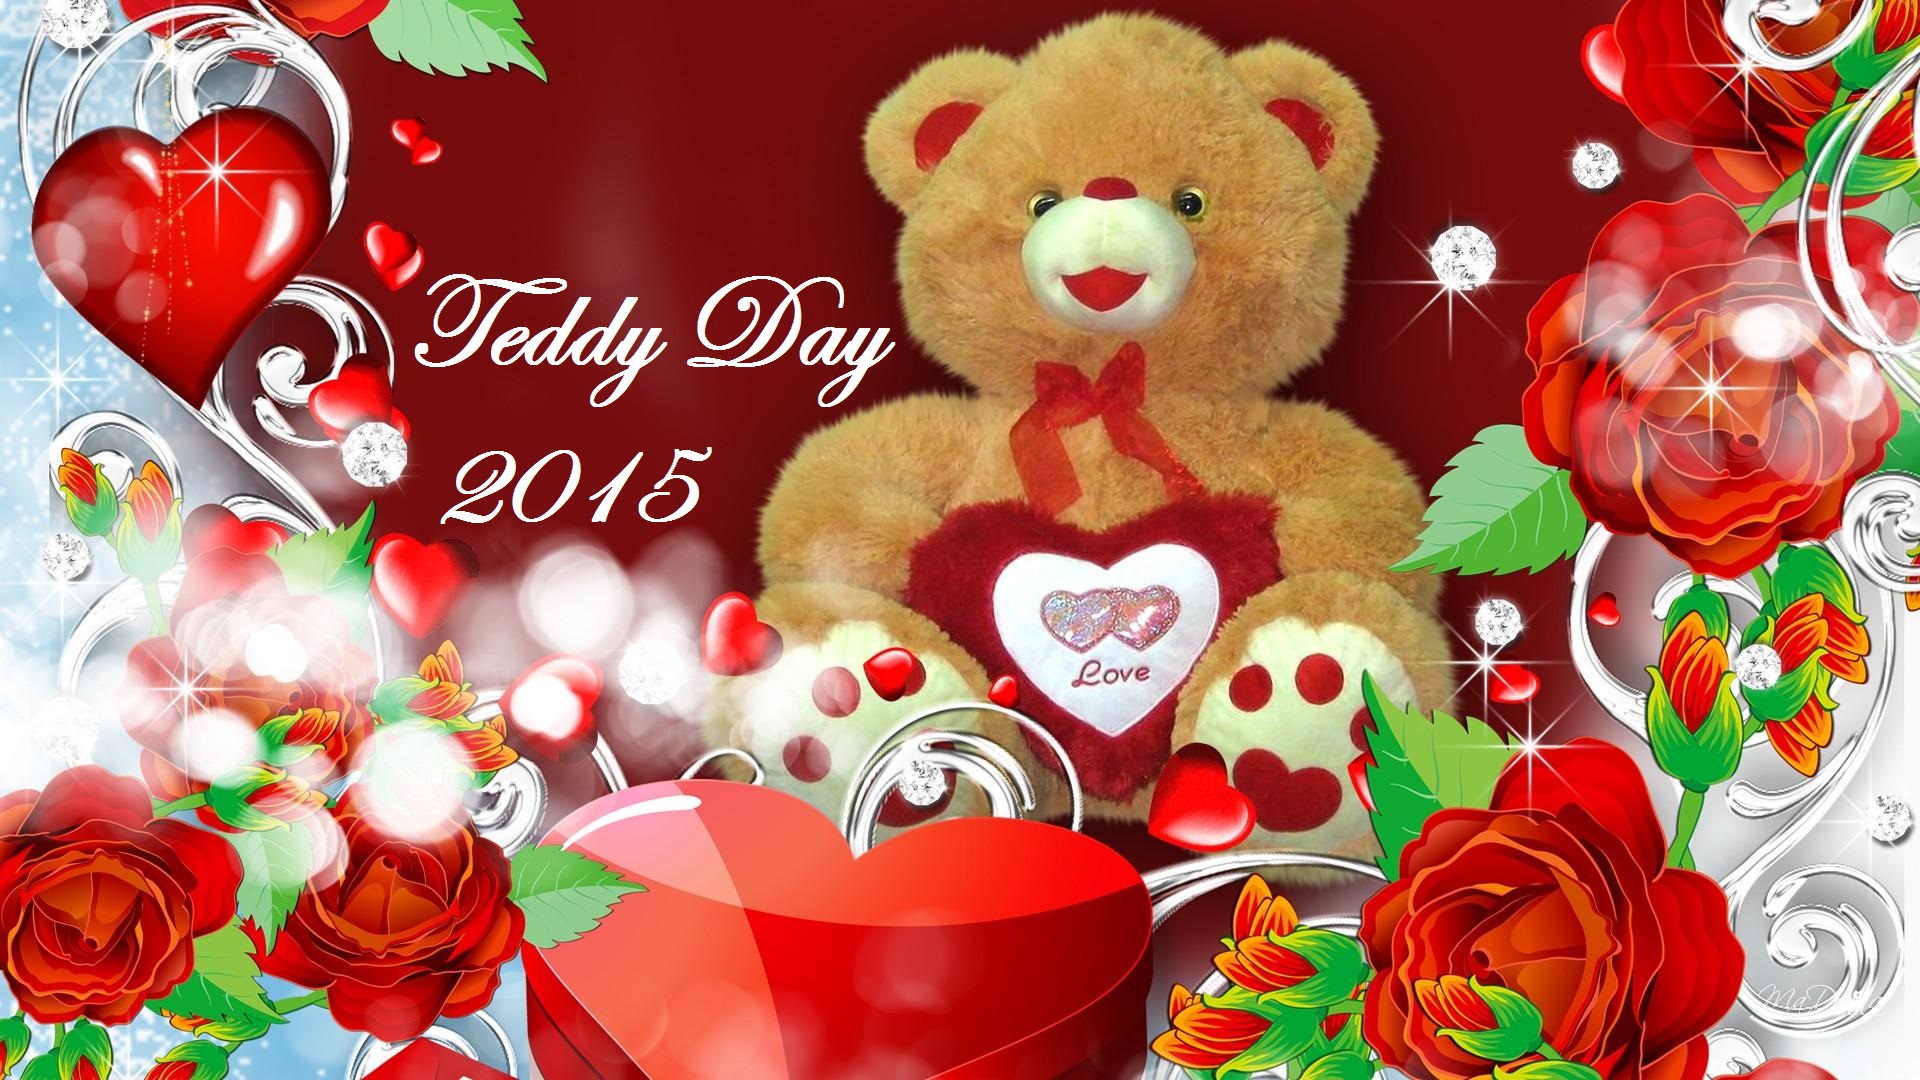 Teddy Day SMS HD Wallpapers Quotes Images Wishes Status | Happy Teddy Day  Greetings Photos Pictures